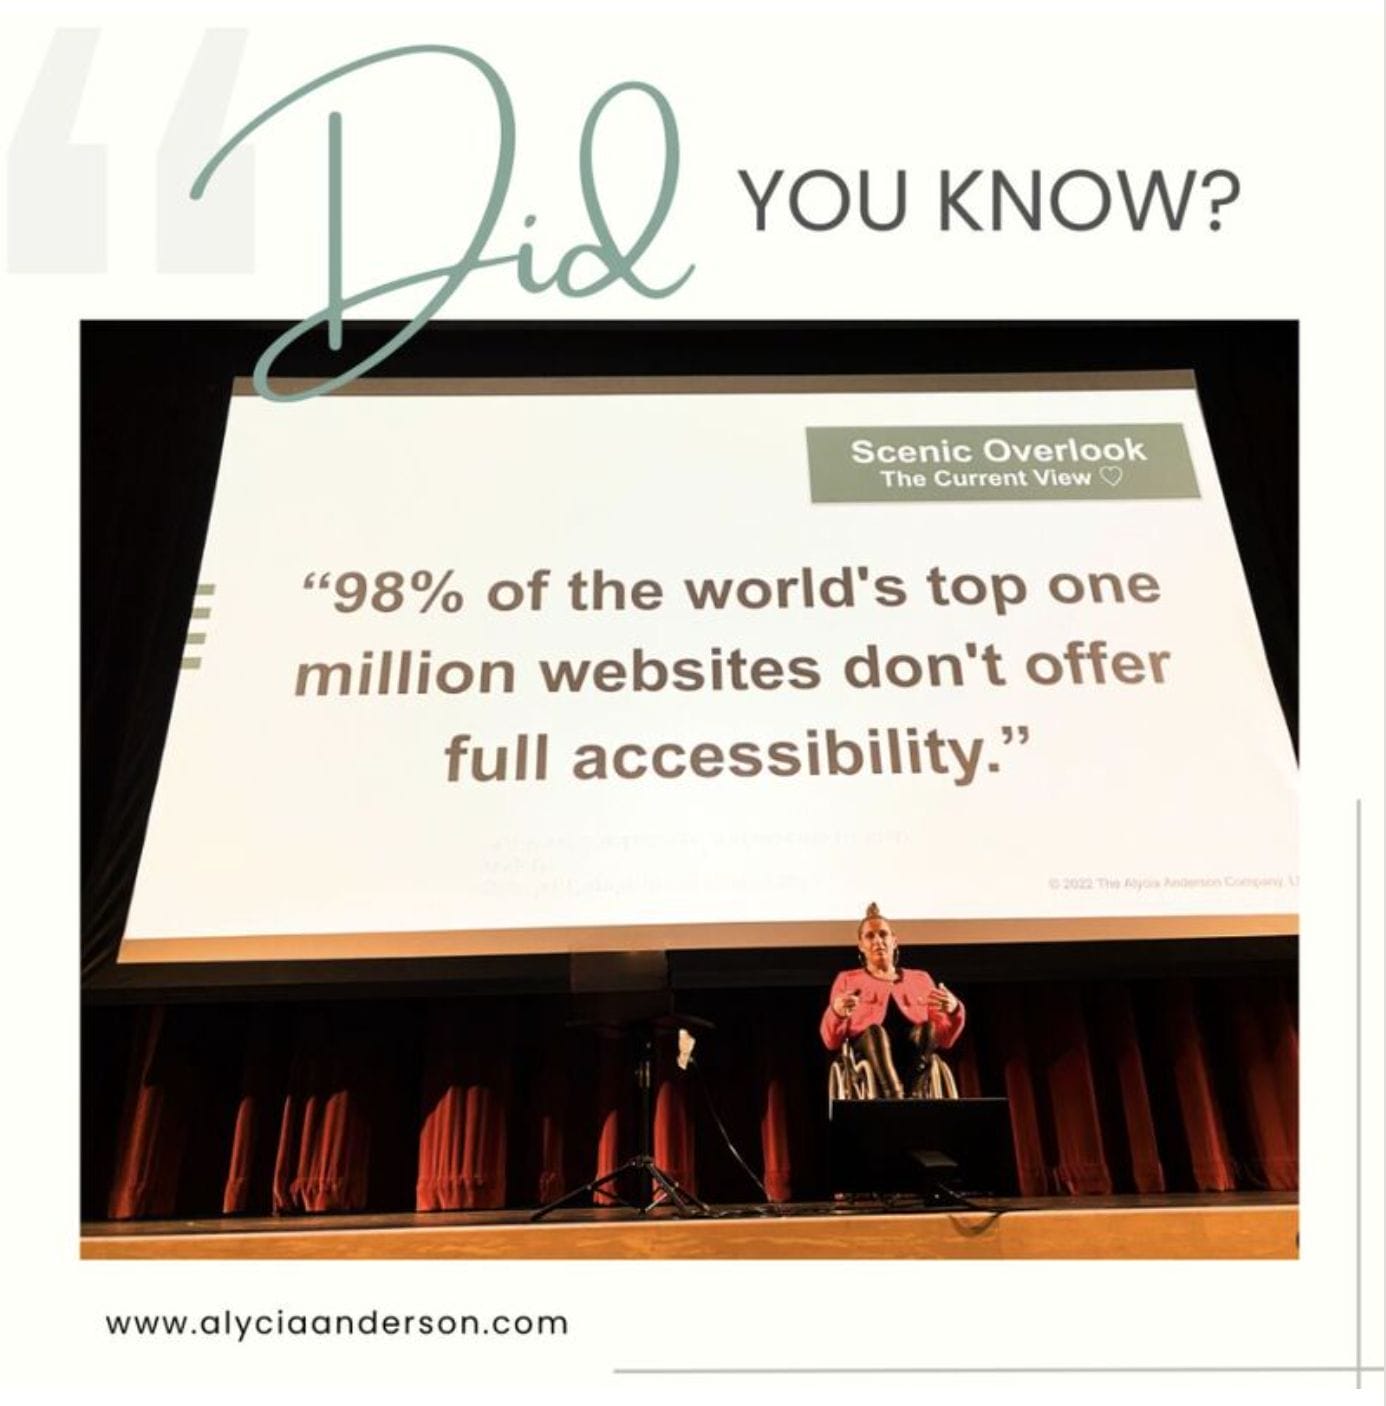 heading of image says did you know alycia on stage with slide that says 98 percent of worlds top websites are not fully accessible